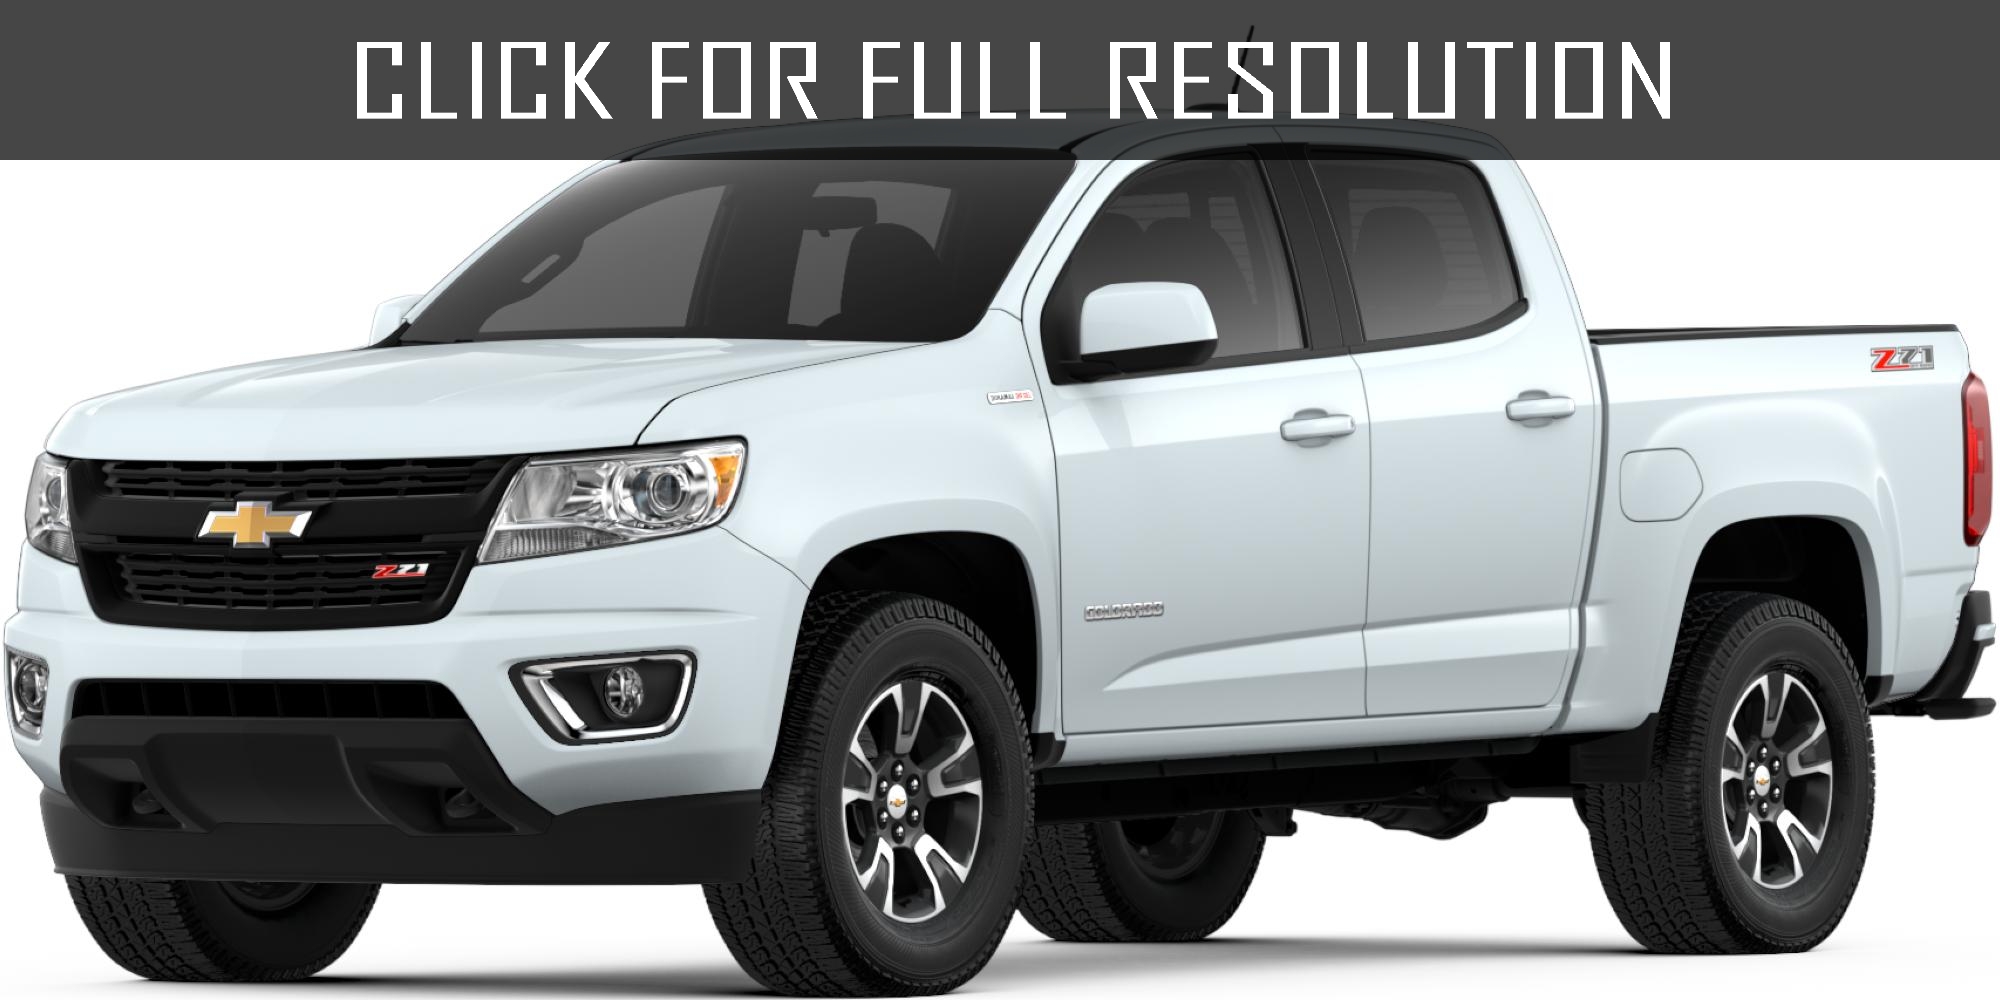 Chevrolet Colorado White amazing photo gallery, some information and